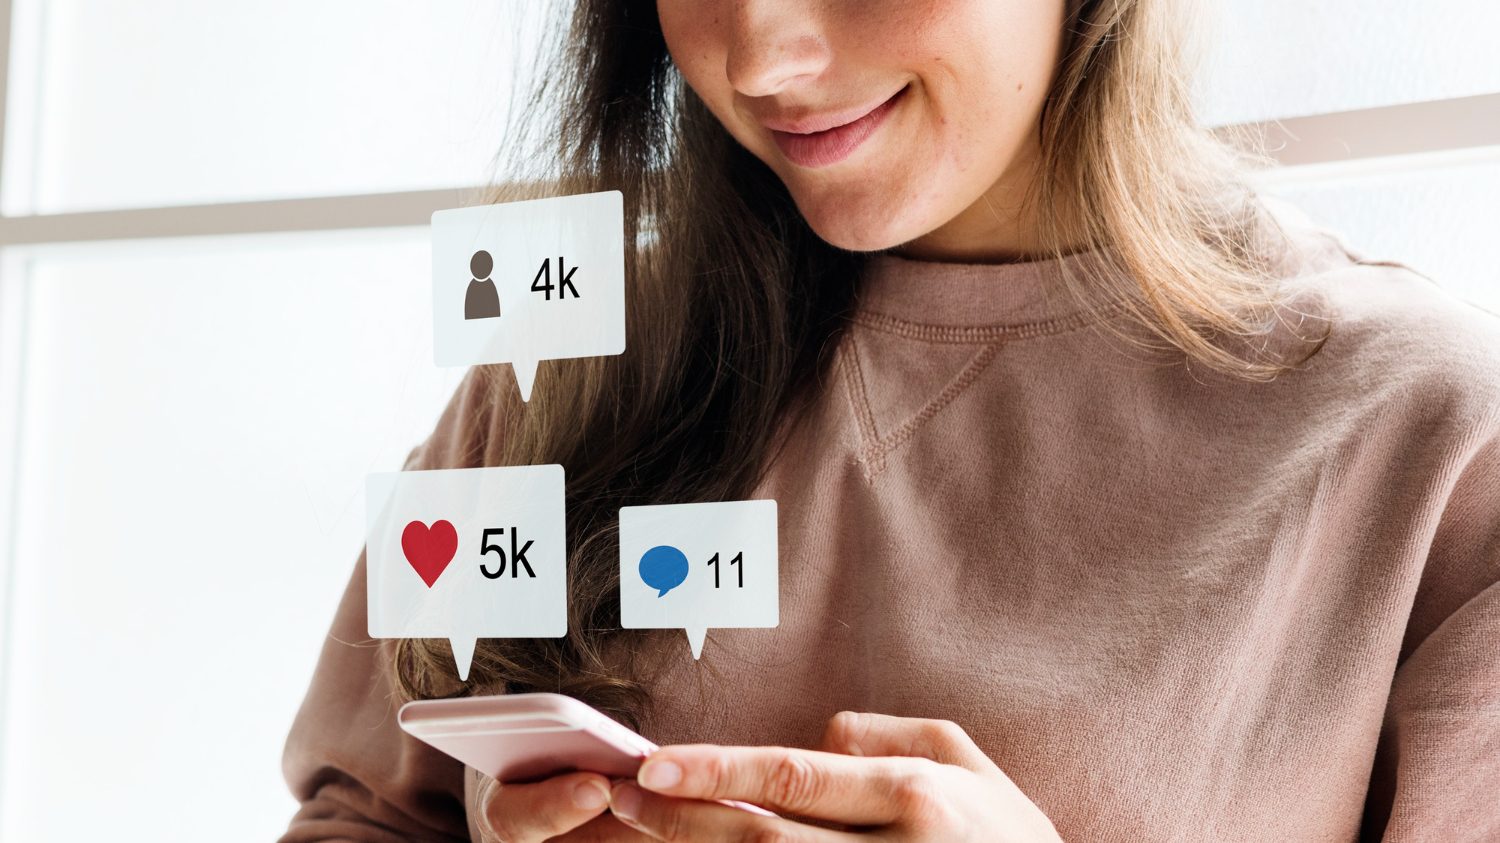 woman with most followers Instagram